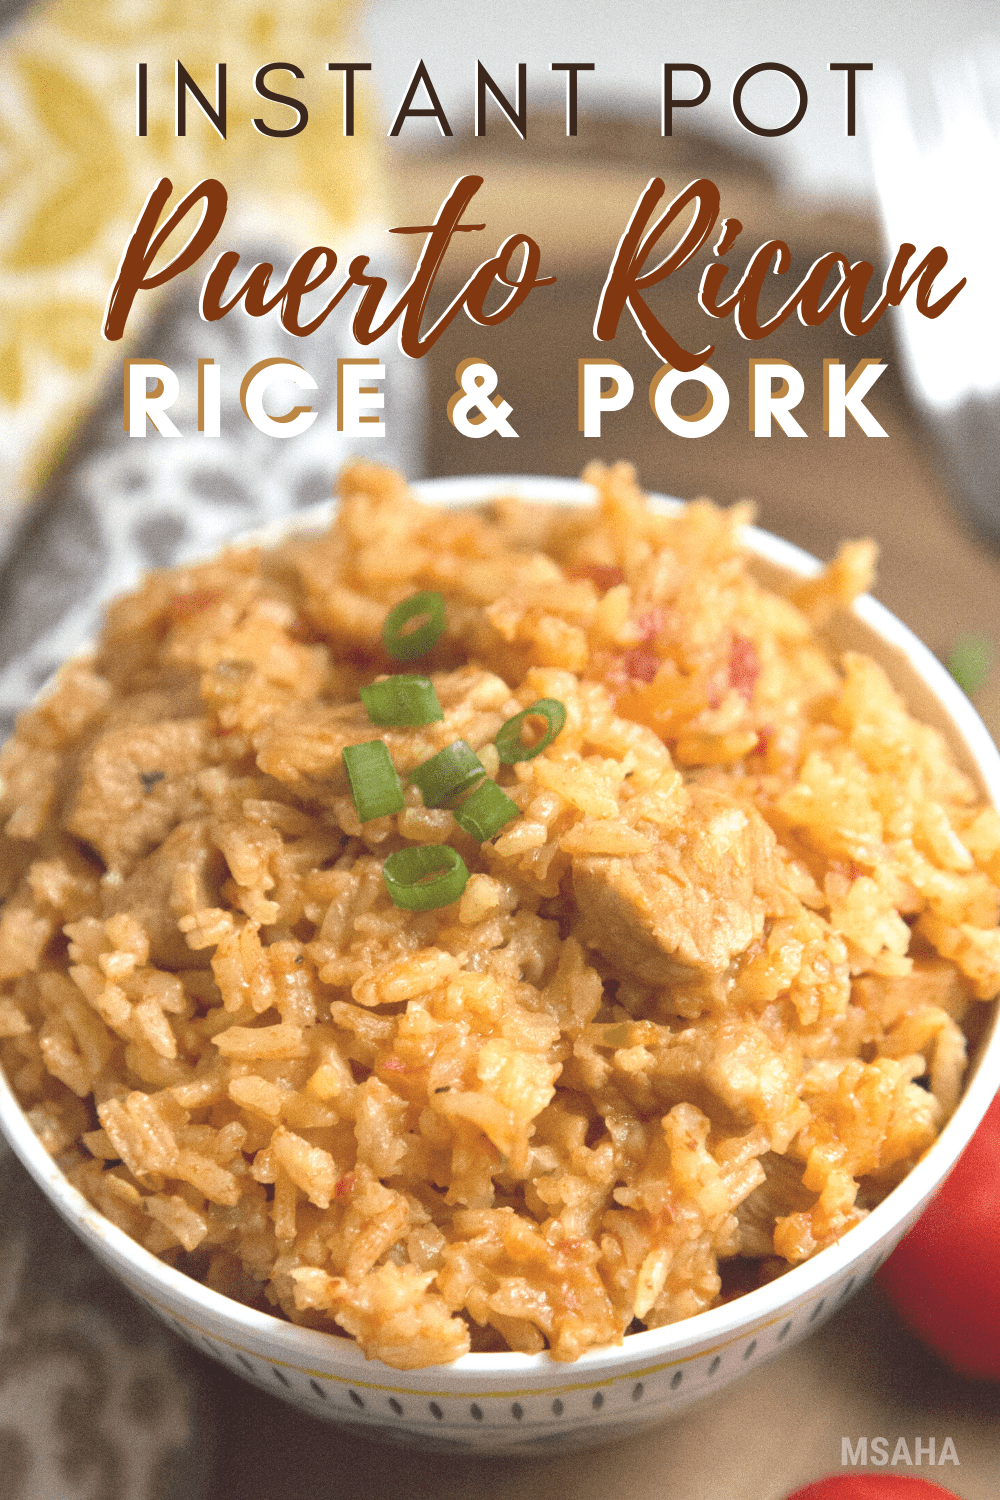 Learn how to make this Instant Pot Puerto Rican Rice and Pork dish. Easy to make and a quick, flavorful family dish you can make tonight. via @mystayathome